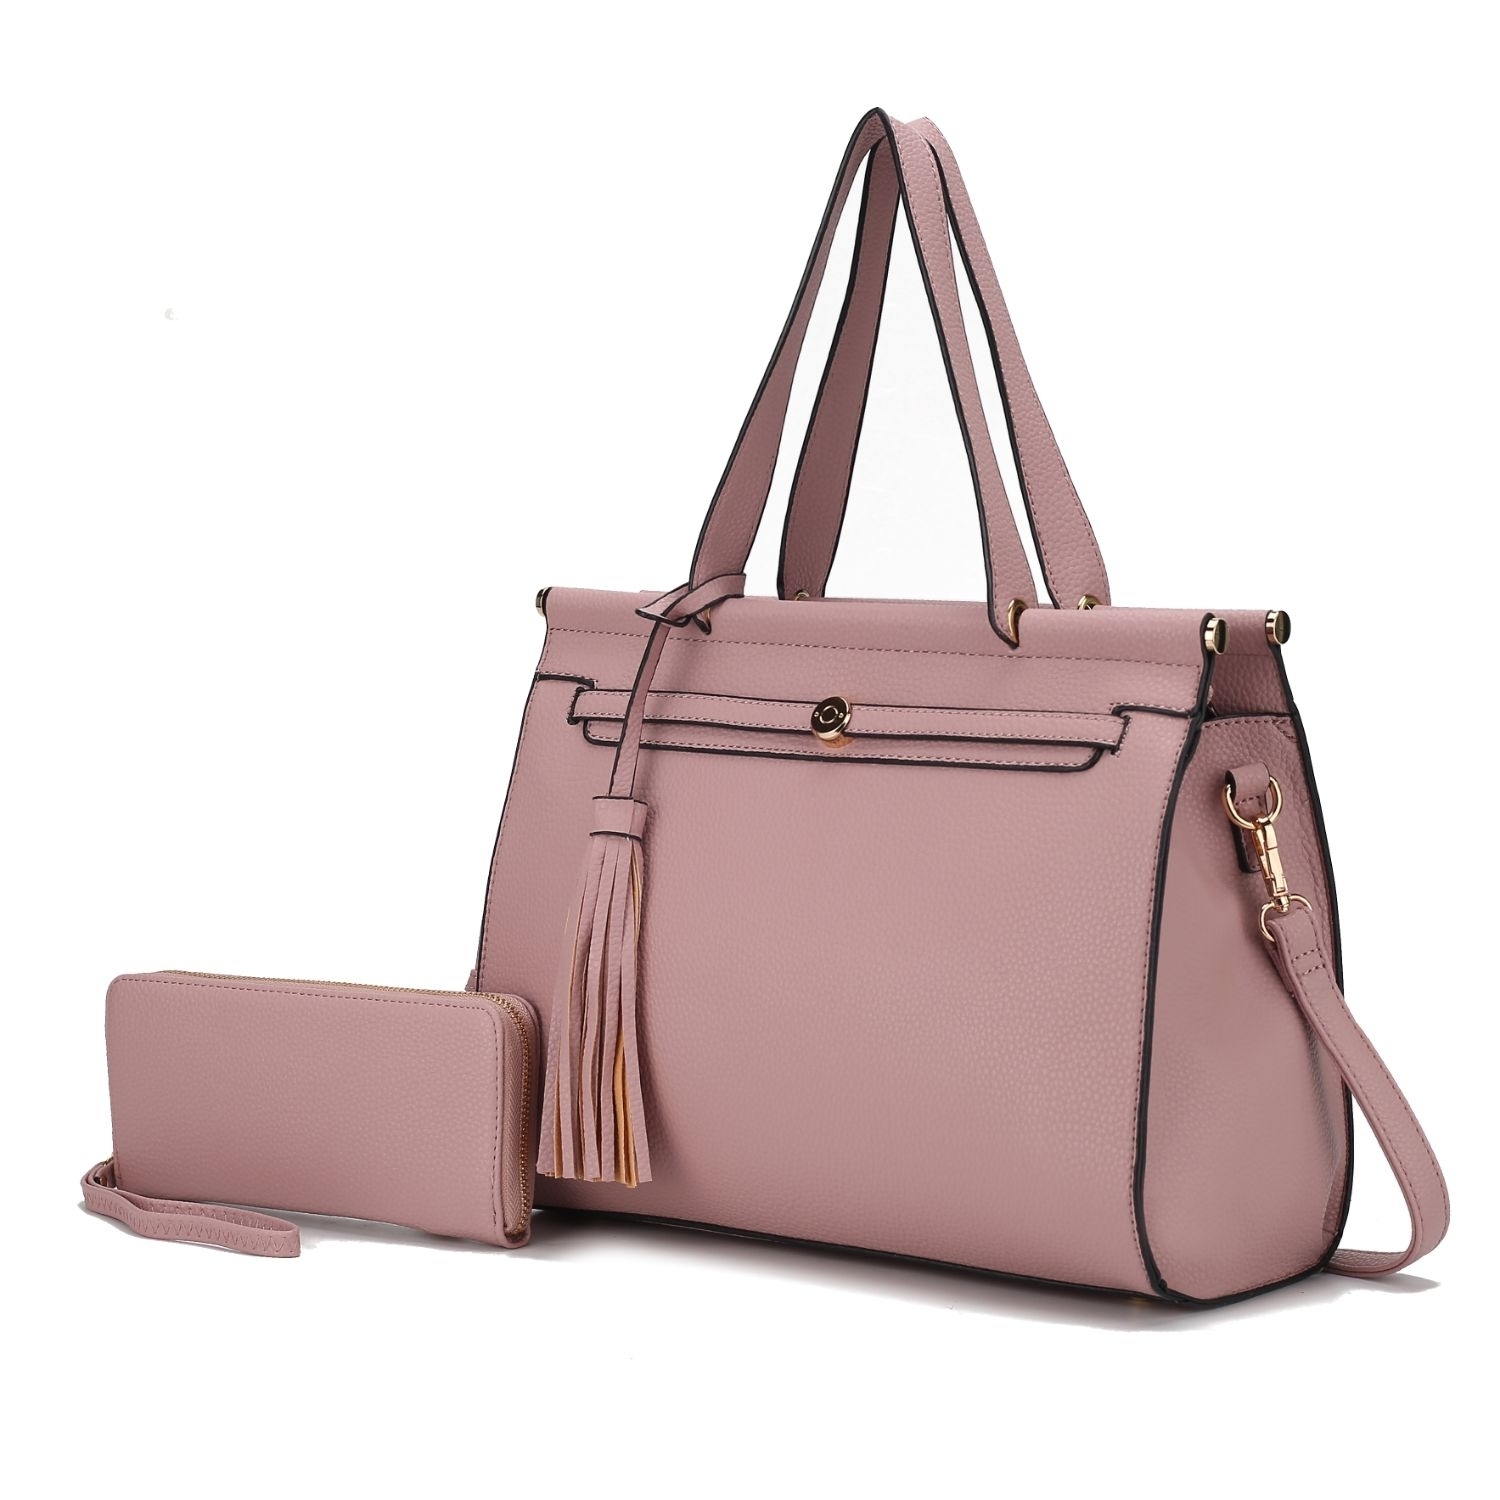 MKF Collection Shelby Vegan Leather Women's Satchel Bag By Mia K With Wallet -2 Pieces - Mauve